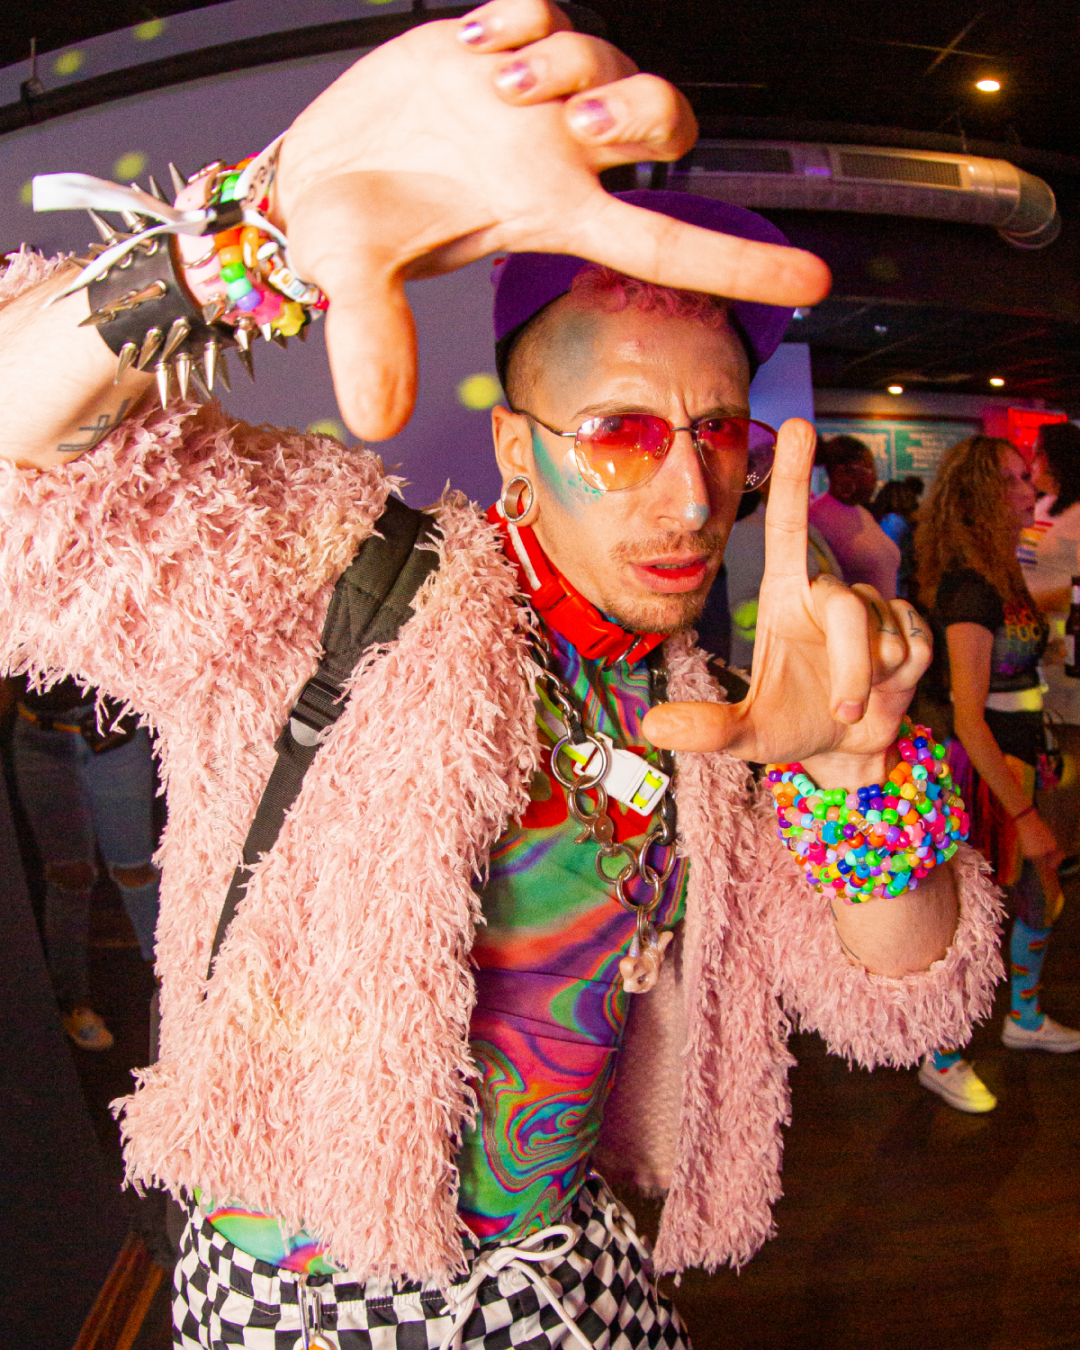 Man dressed up in rainbow colored clothing for Philadelphia Pride Bar Crawl making a square with his hands representing a camera